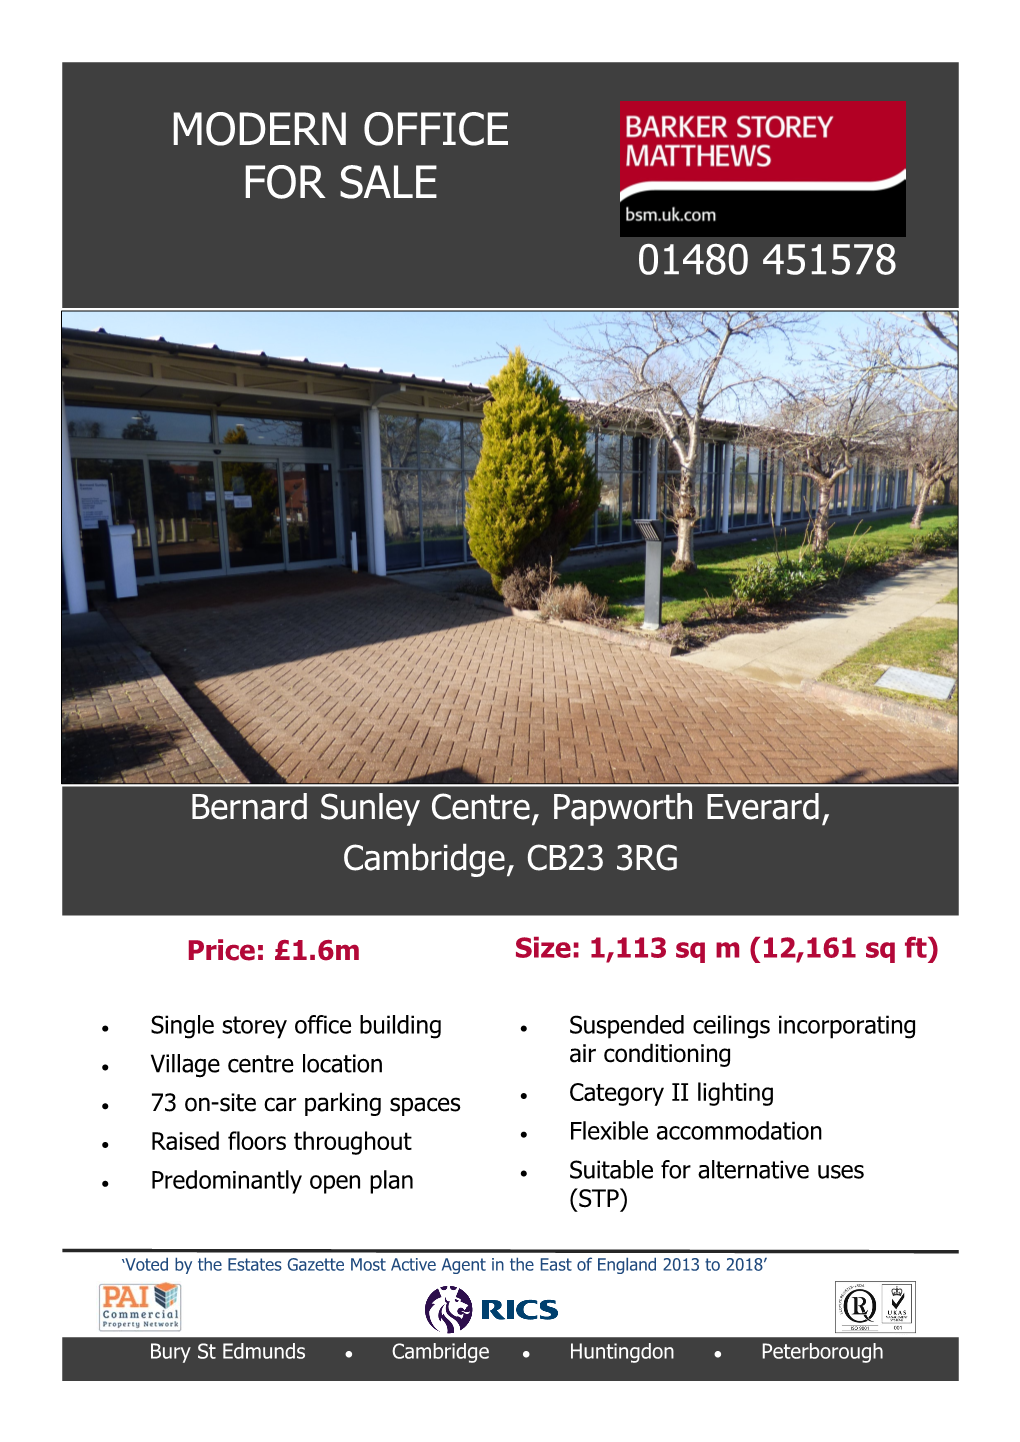 Modern Office for Sale 01480 451578